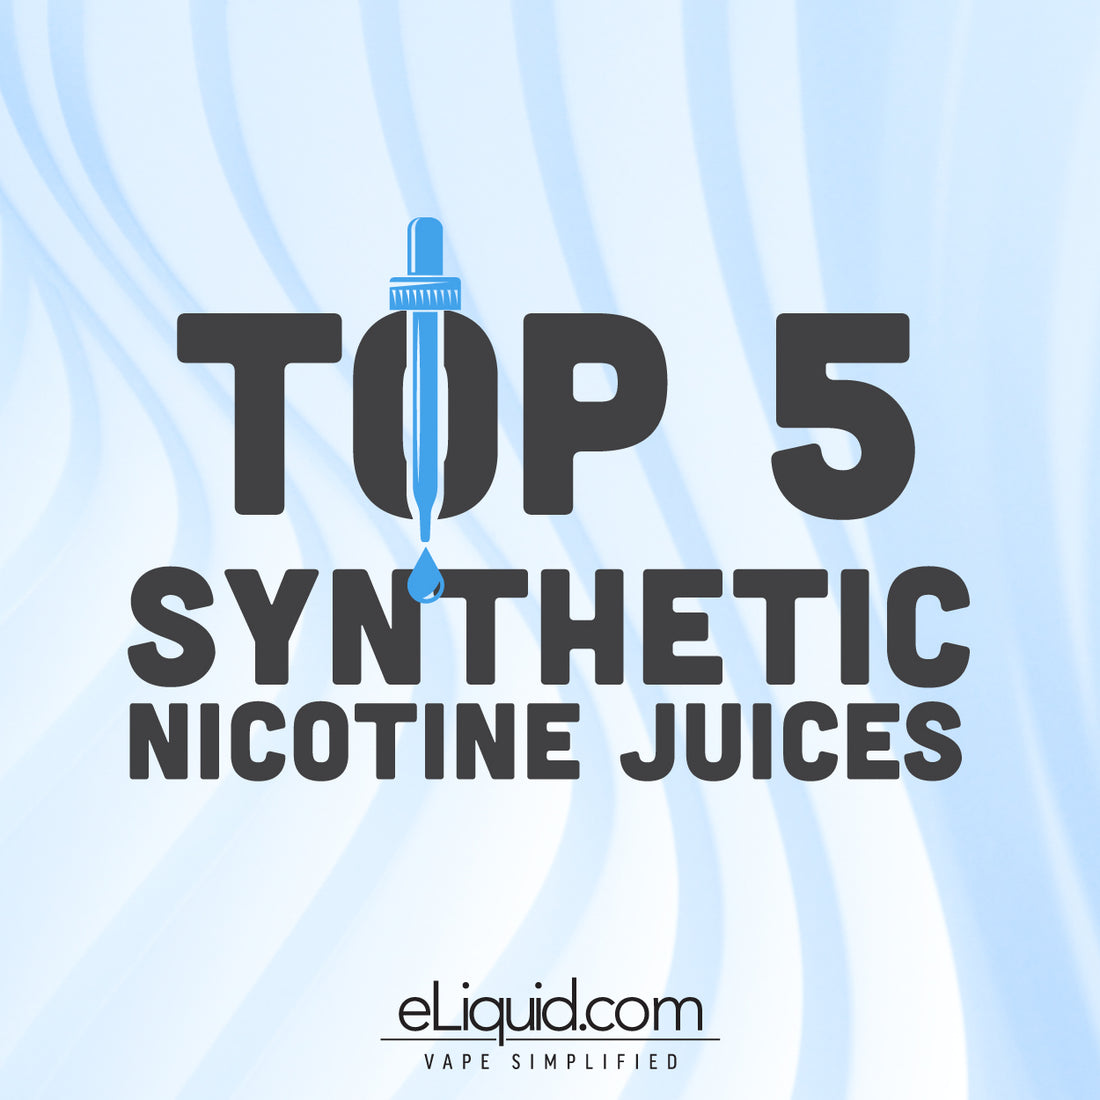 Top 5 Synthetic Nicotine Juices